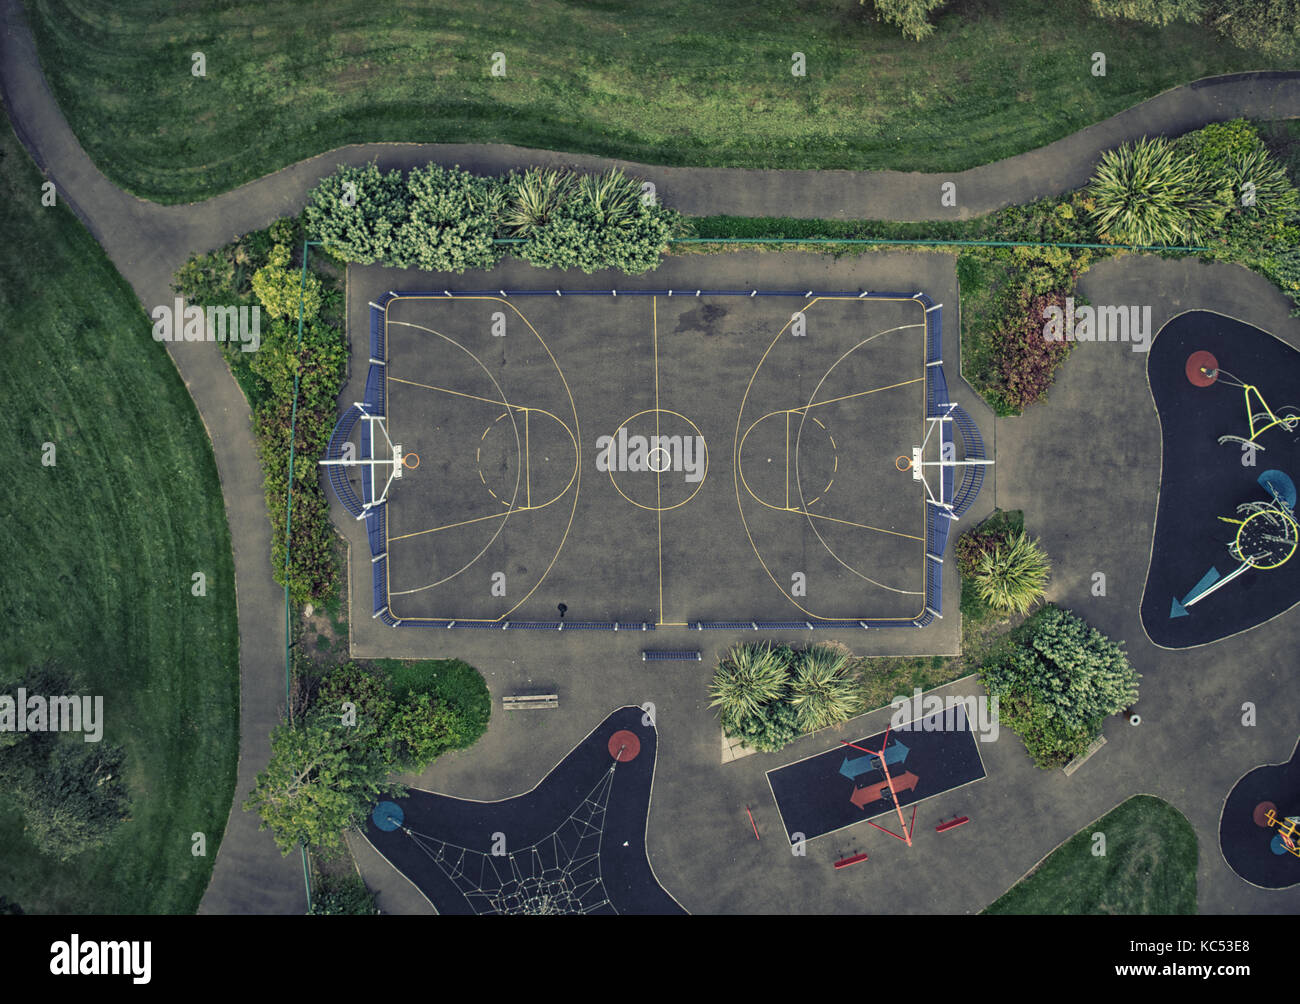 Aerial View Of A Basketball Court From Directly Above Stock Photo Alamy